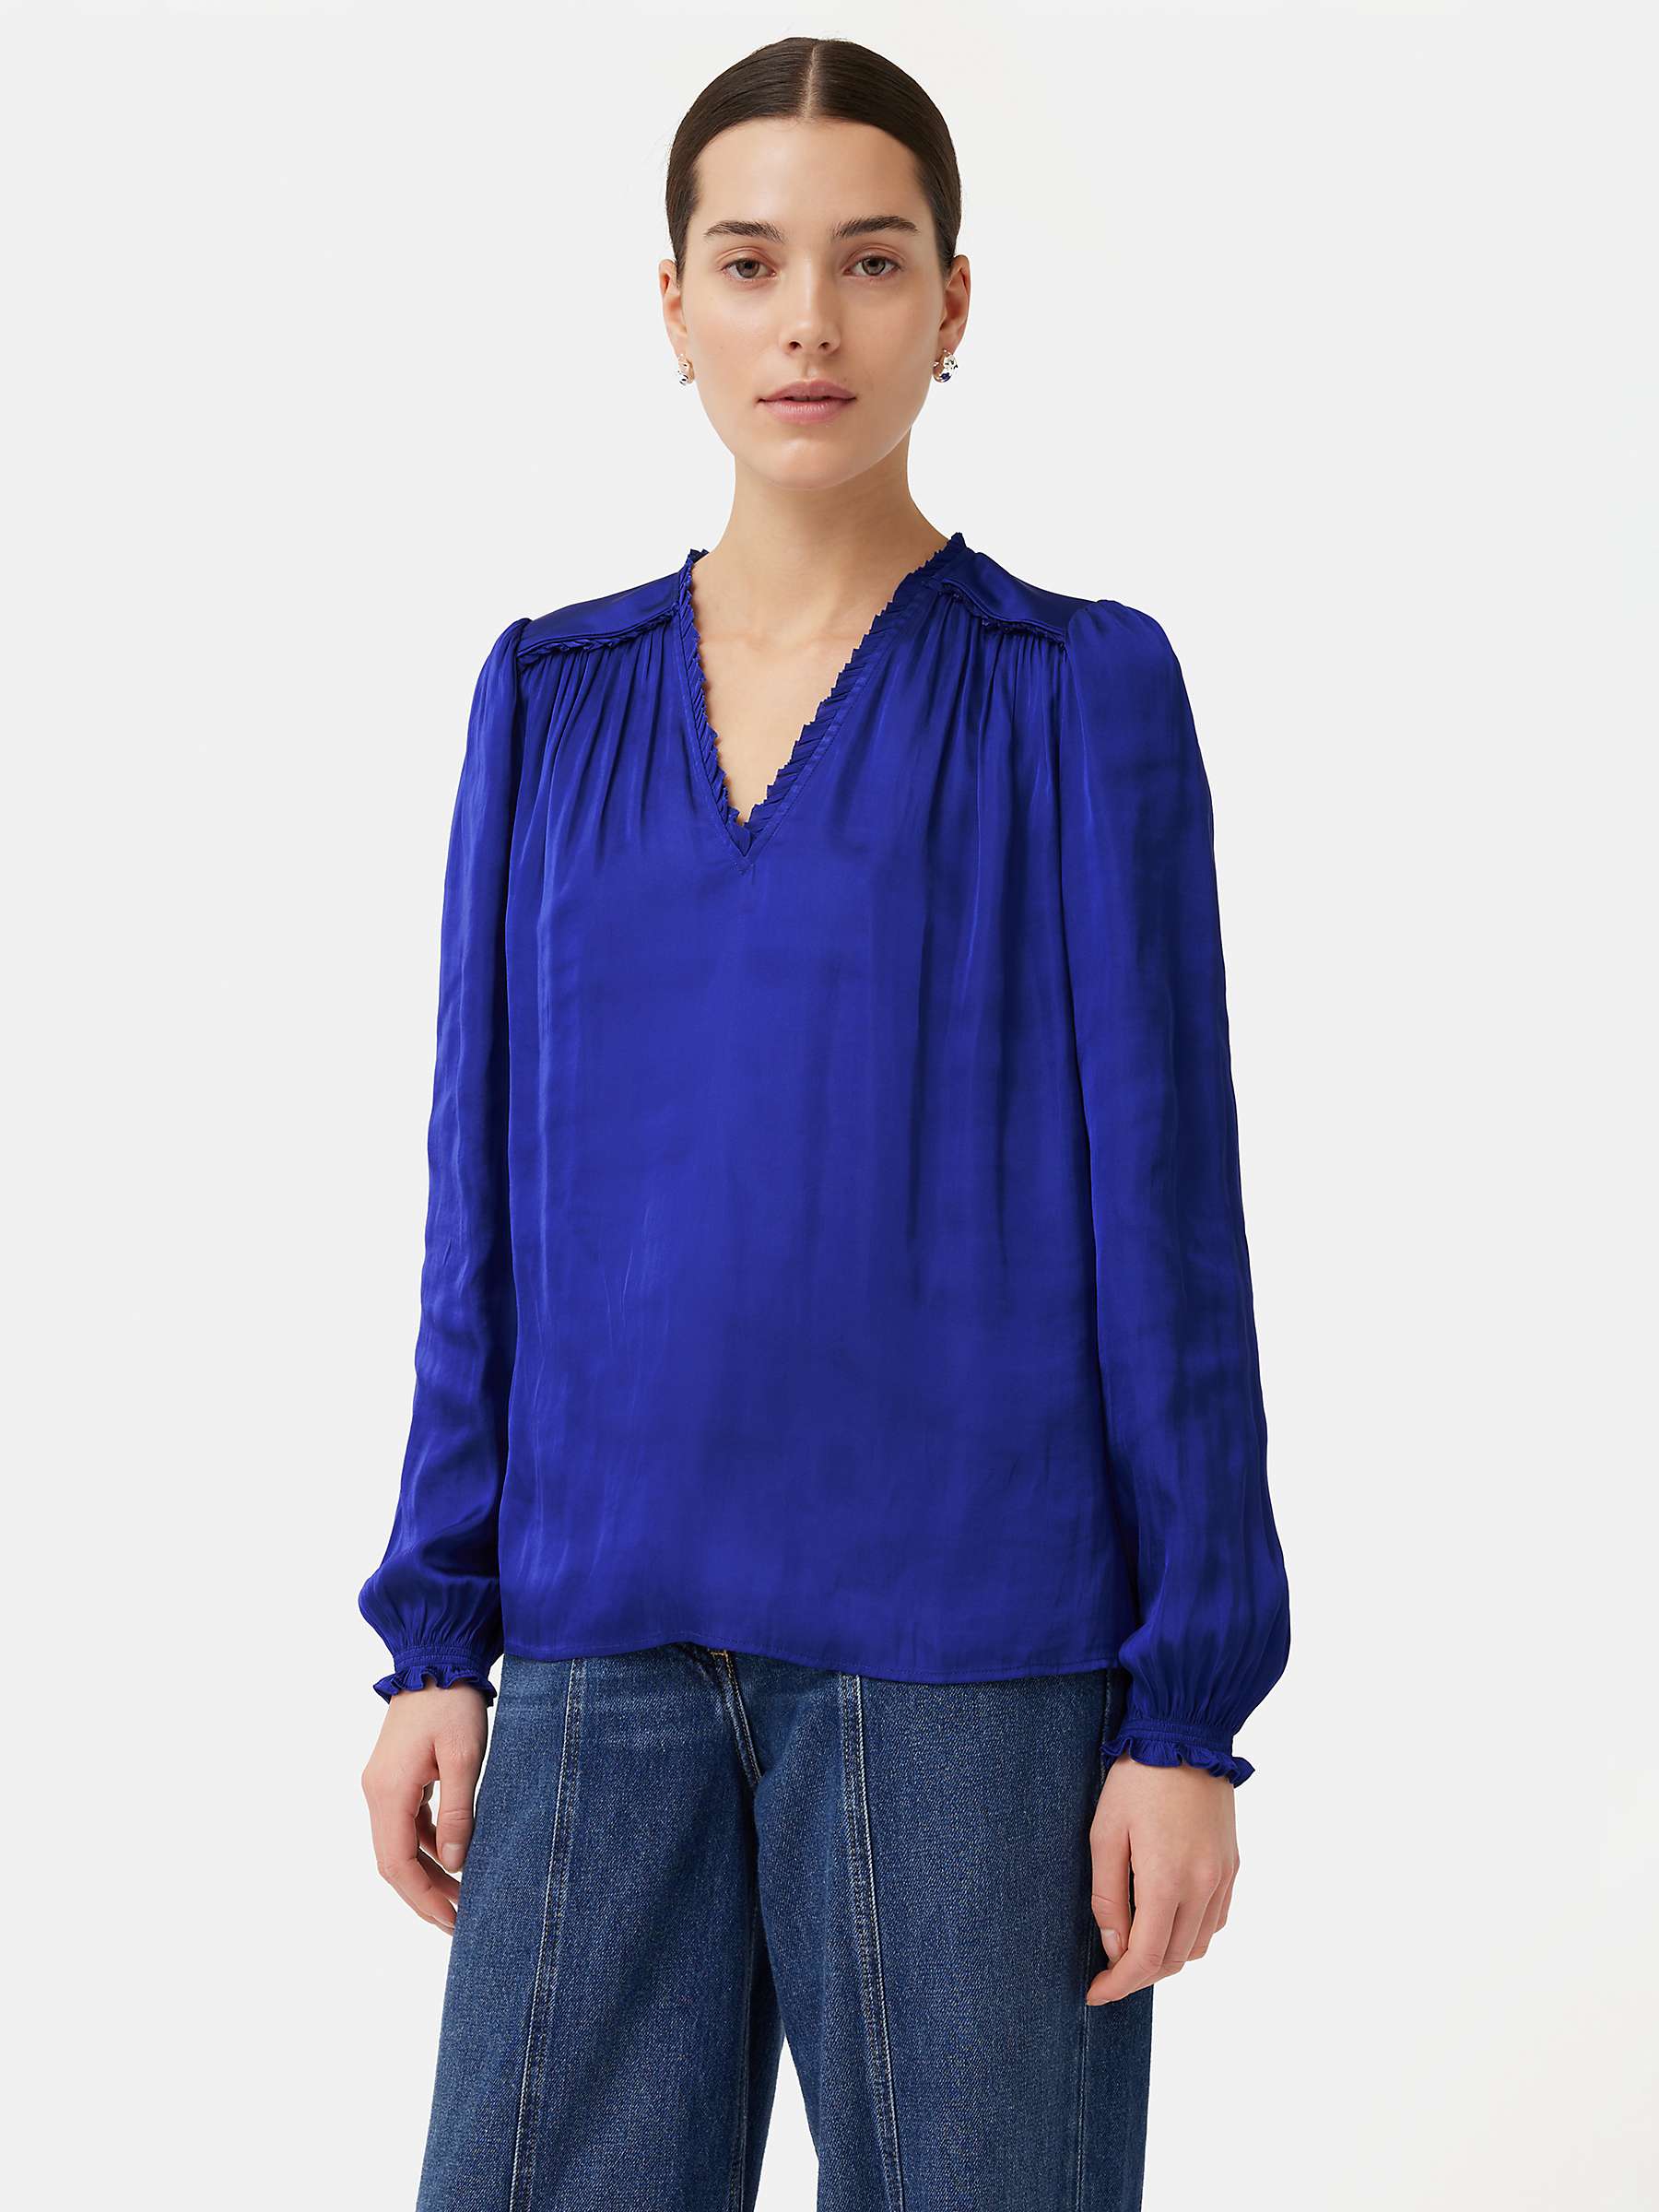 Jigsaw Recycled Satin Frill Detail Top, Blue at John Lewis & Partners